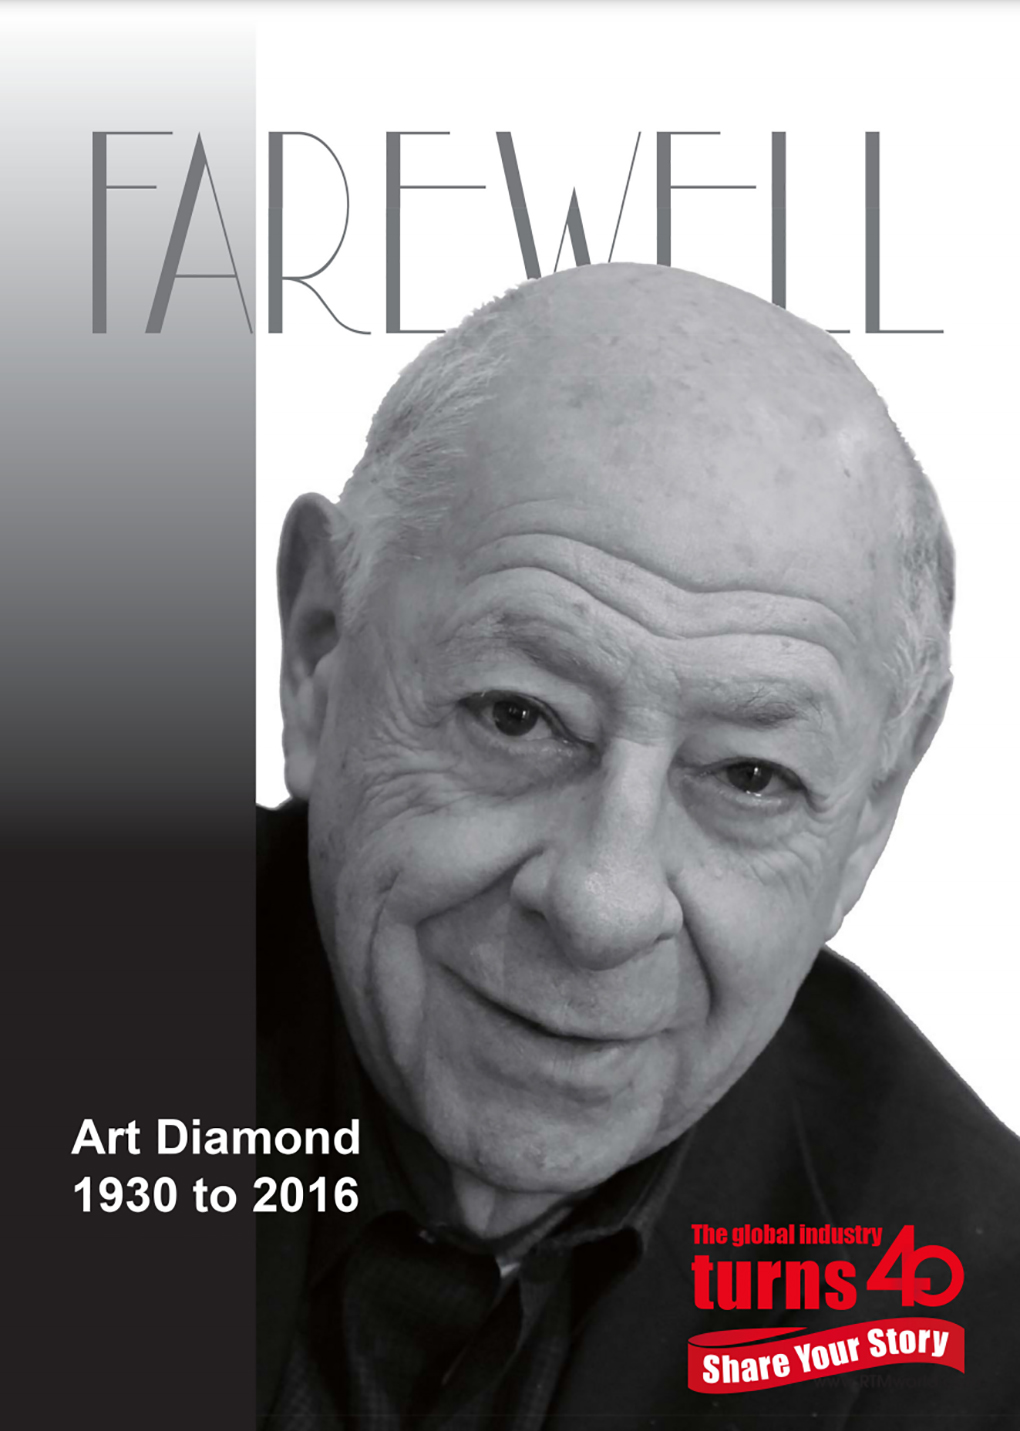 Industry People Pay Tribute to Art Diamond